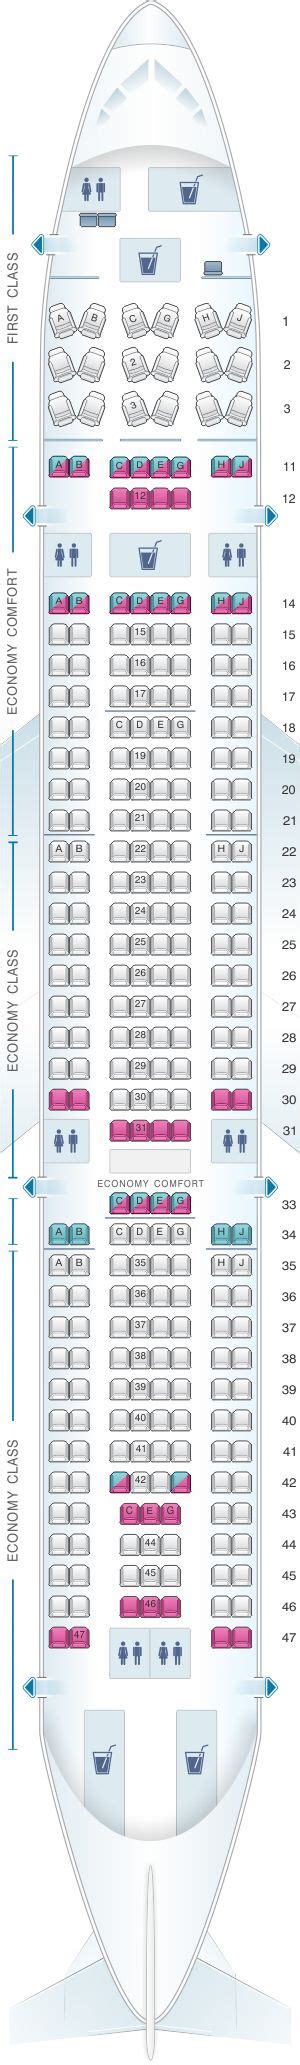 Seat Map Hawaiian Airlines Airbus A330 200 Retrofitted Air Transat